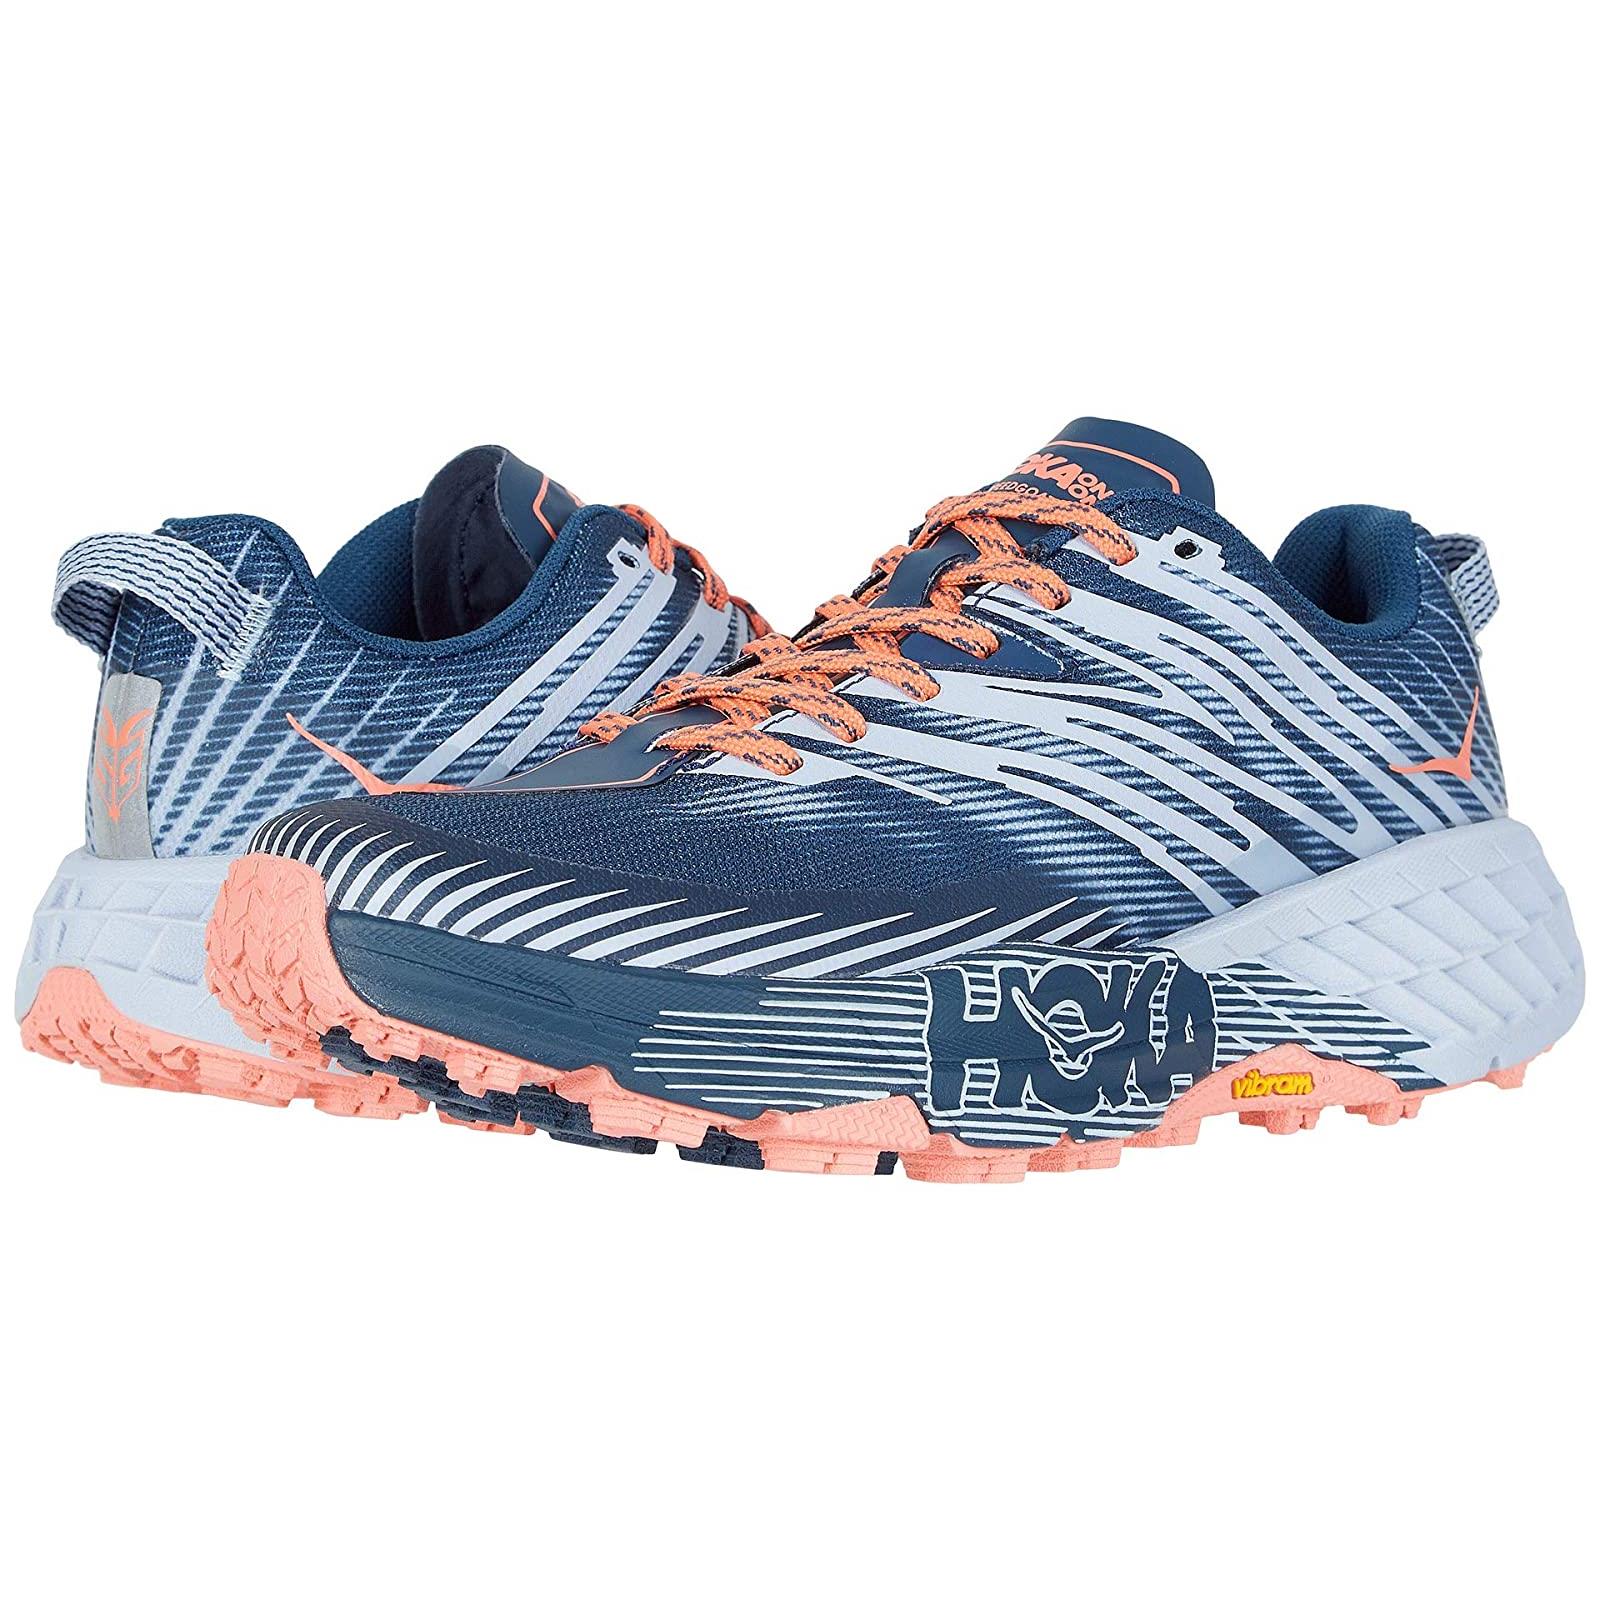 Woman`s Sneakers Athletic Shoes Hoka One One Speedgoat 4 Majolica Blue/Heather